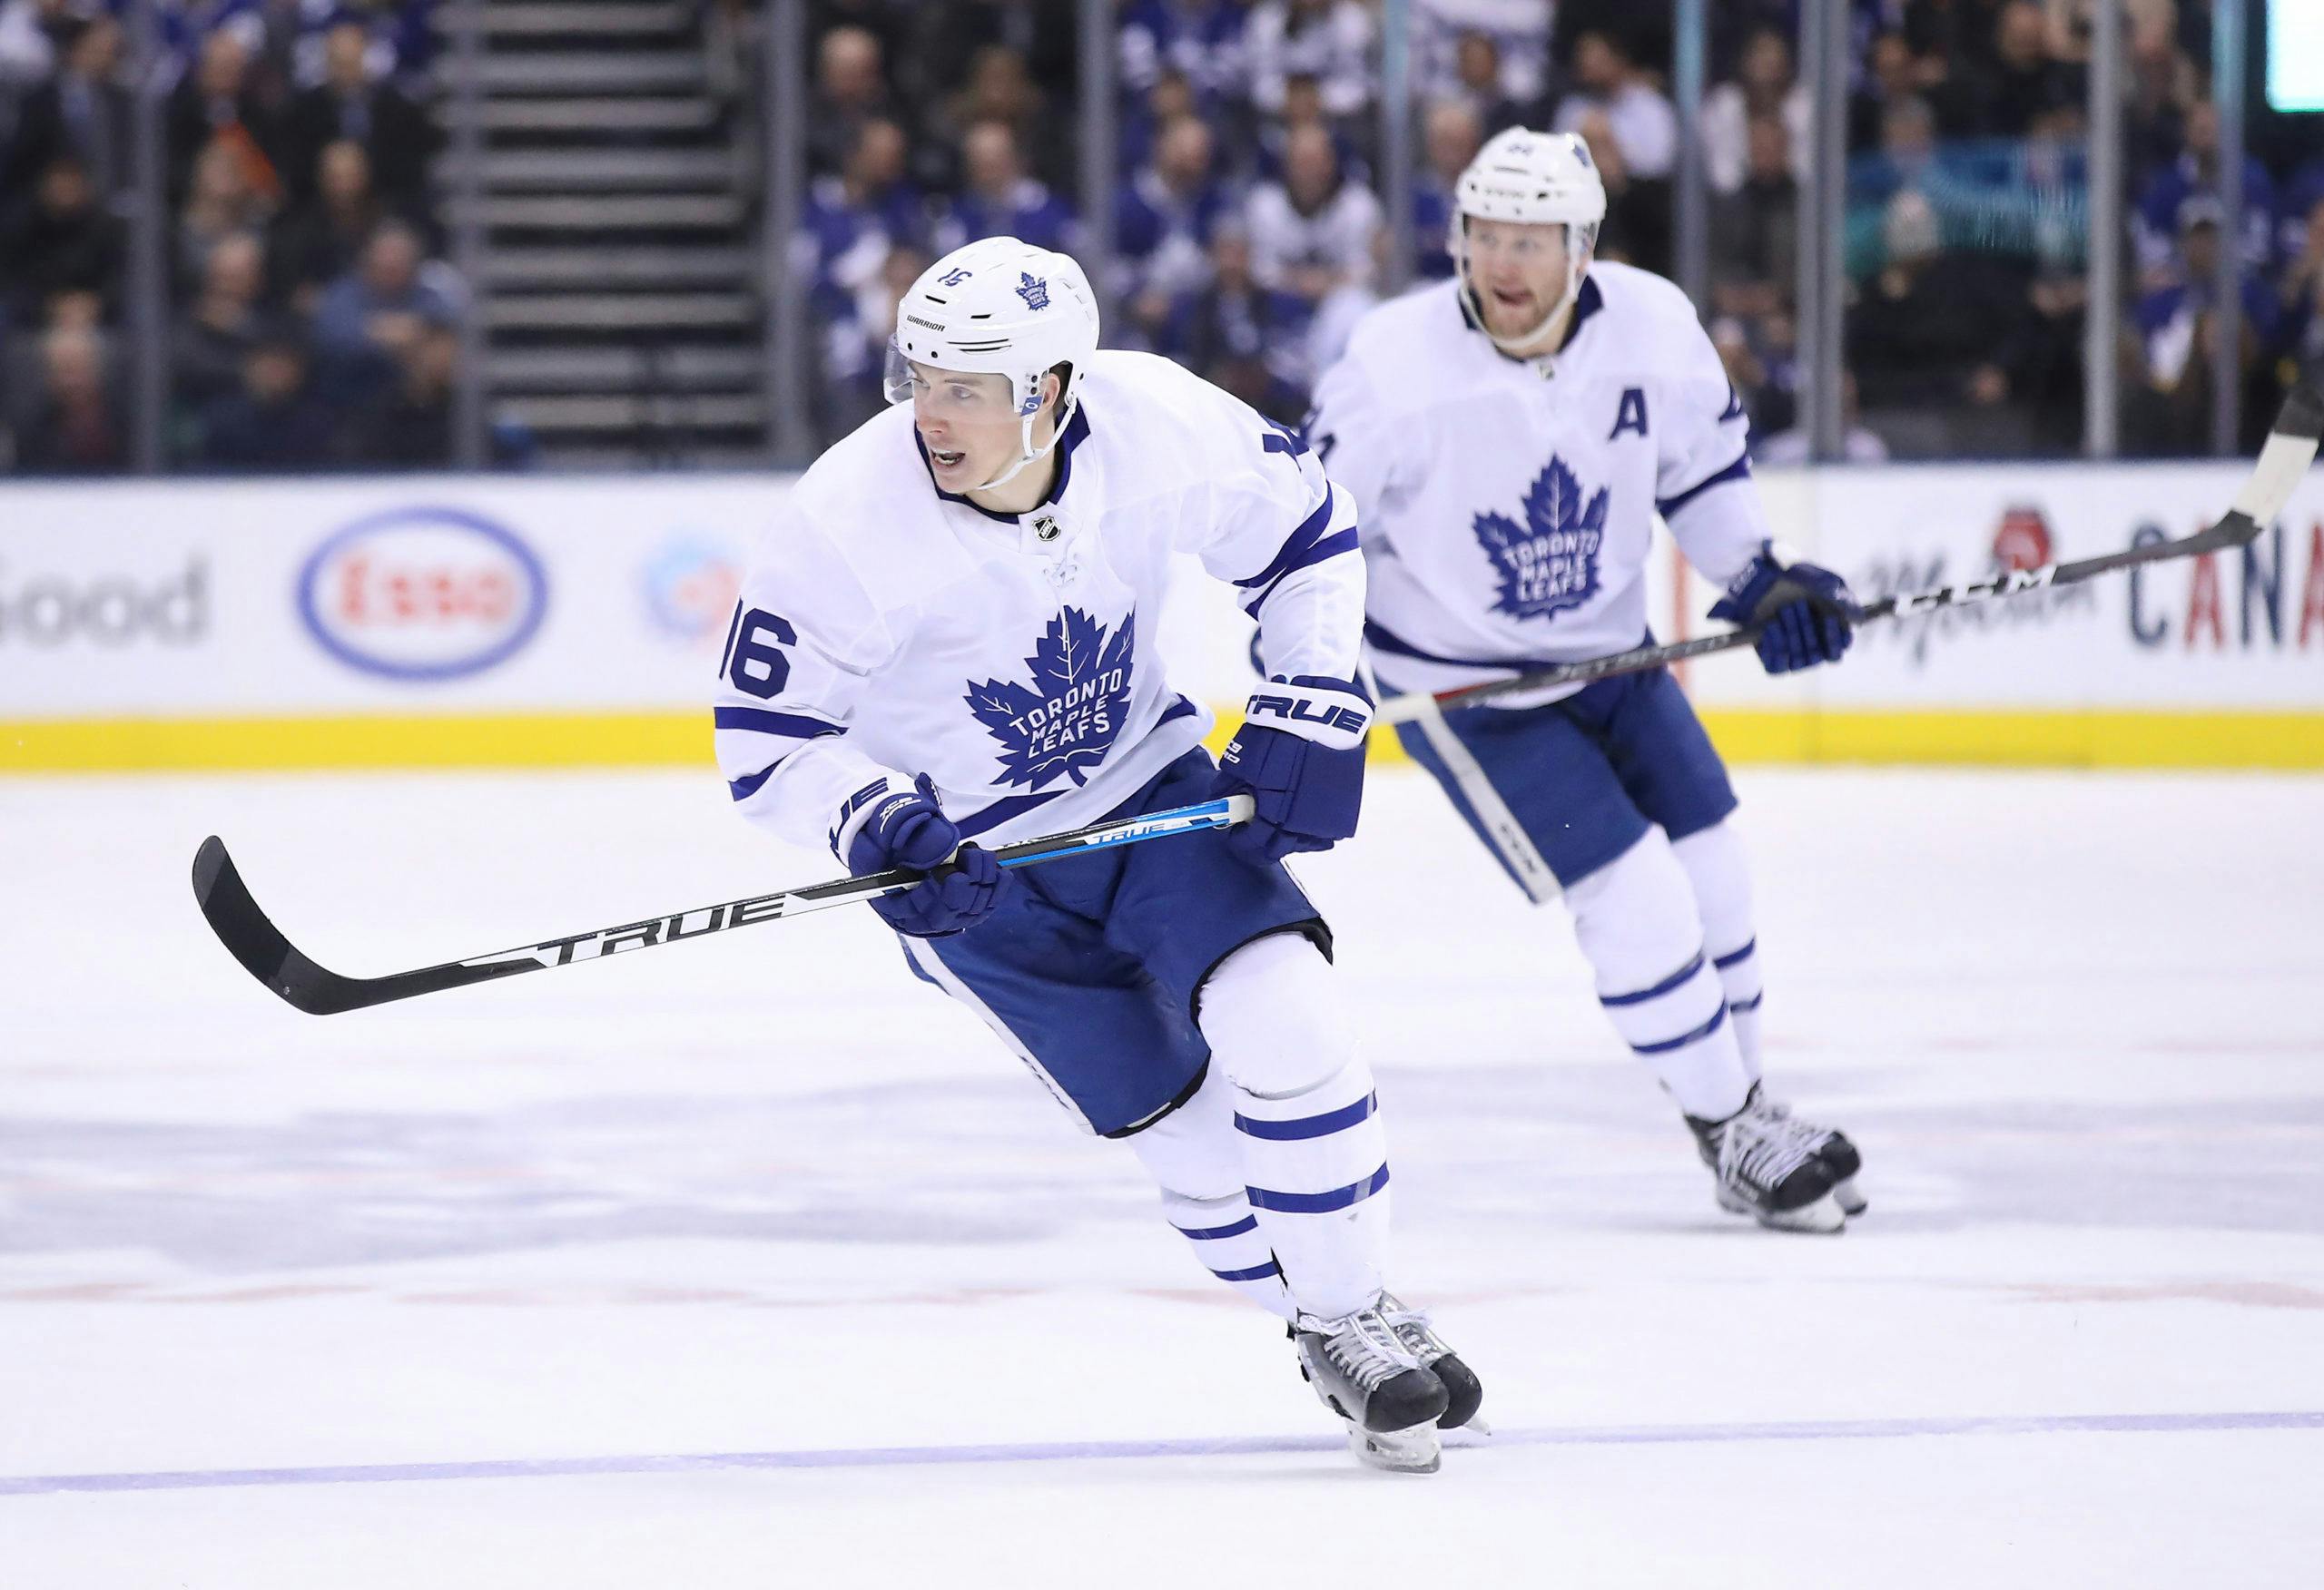 Leafs Game Preview #12: Liljegren Returns